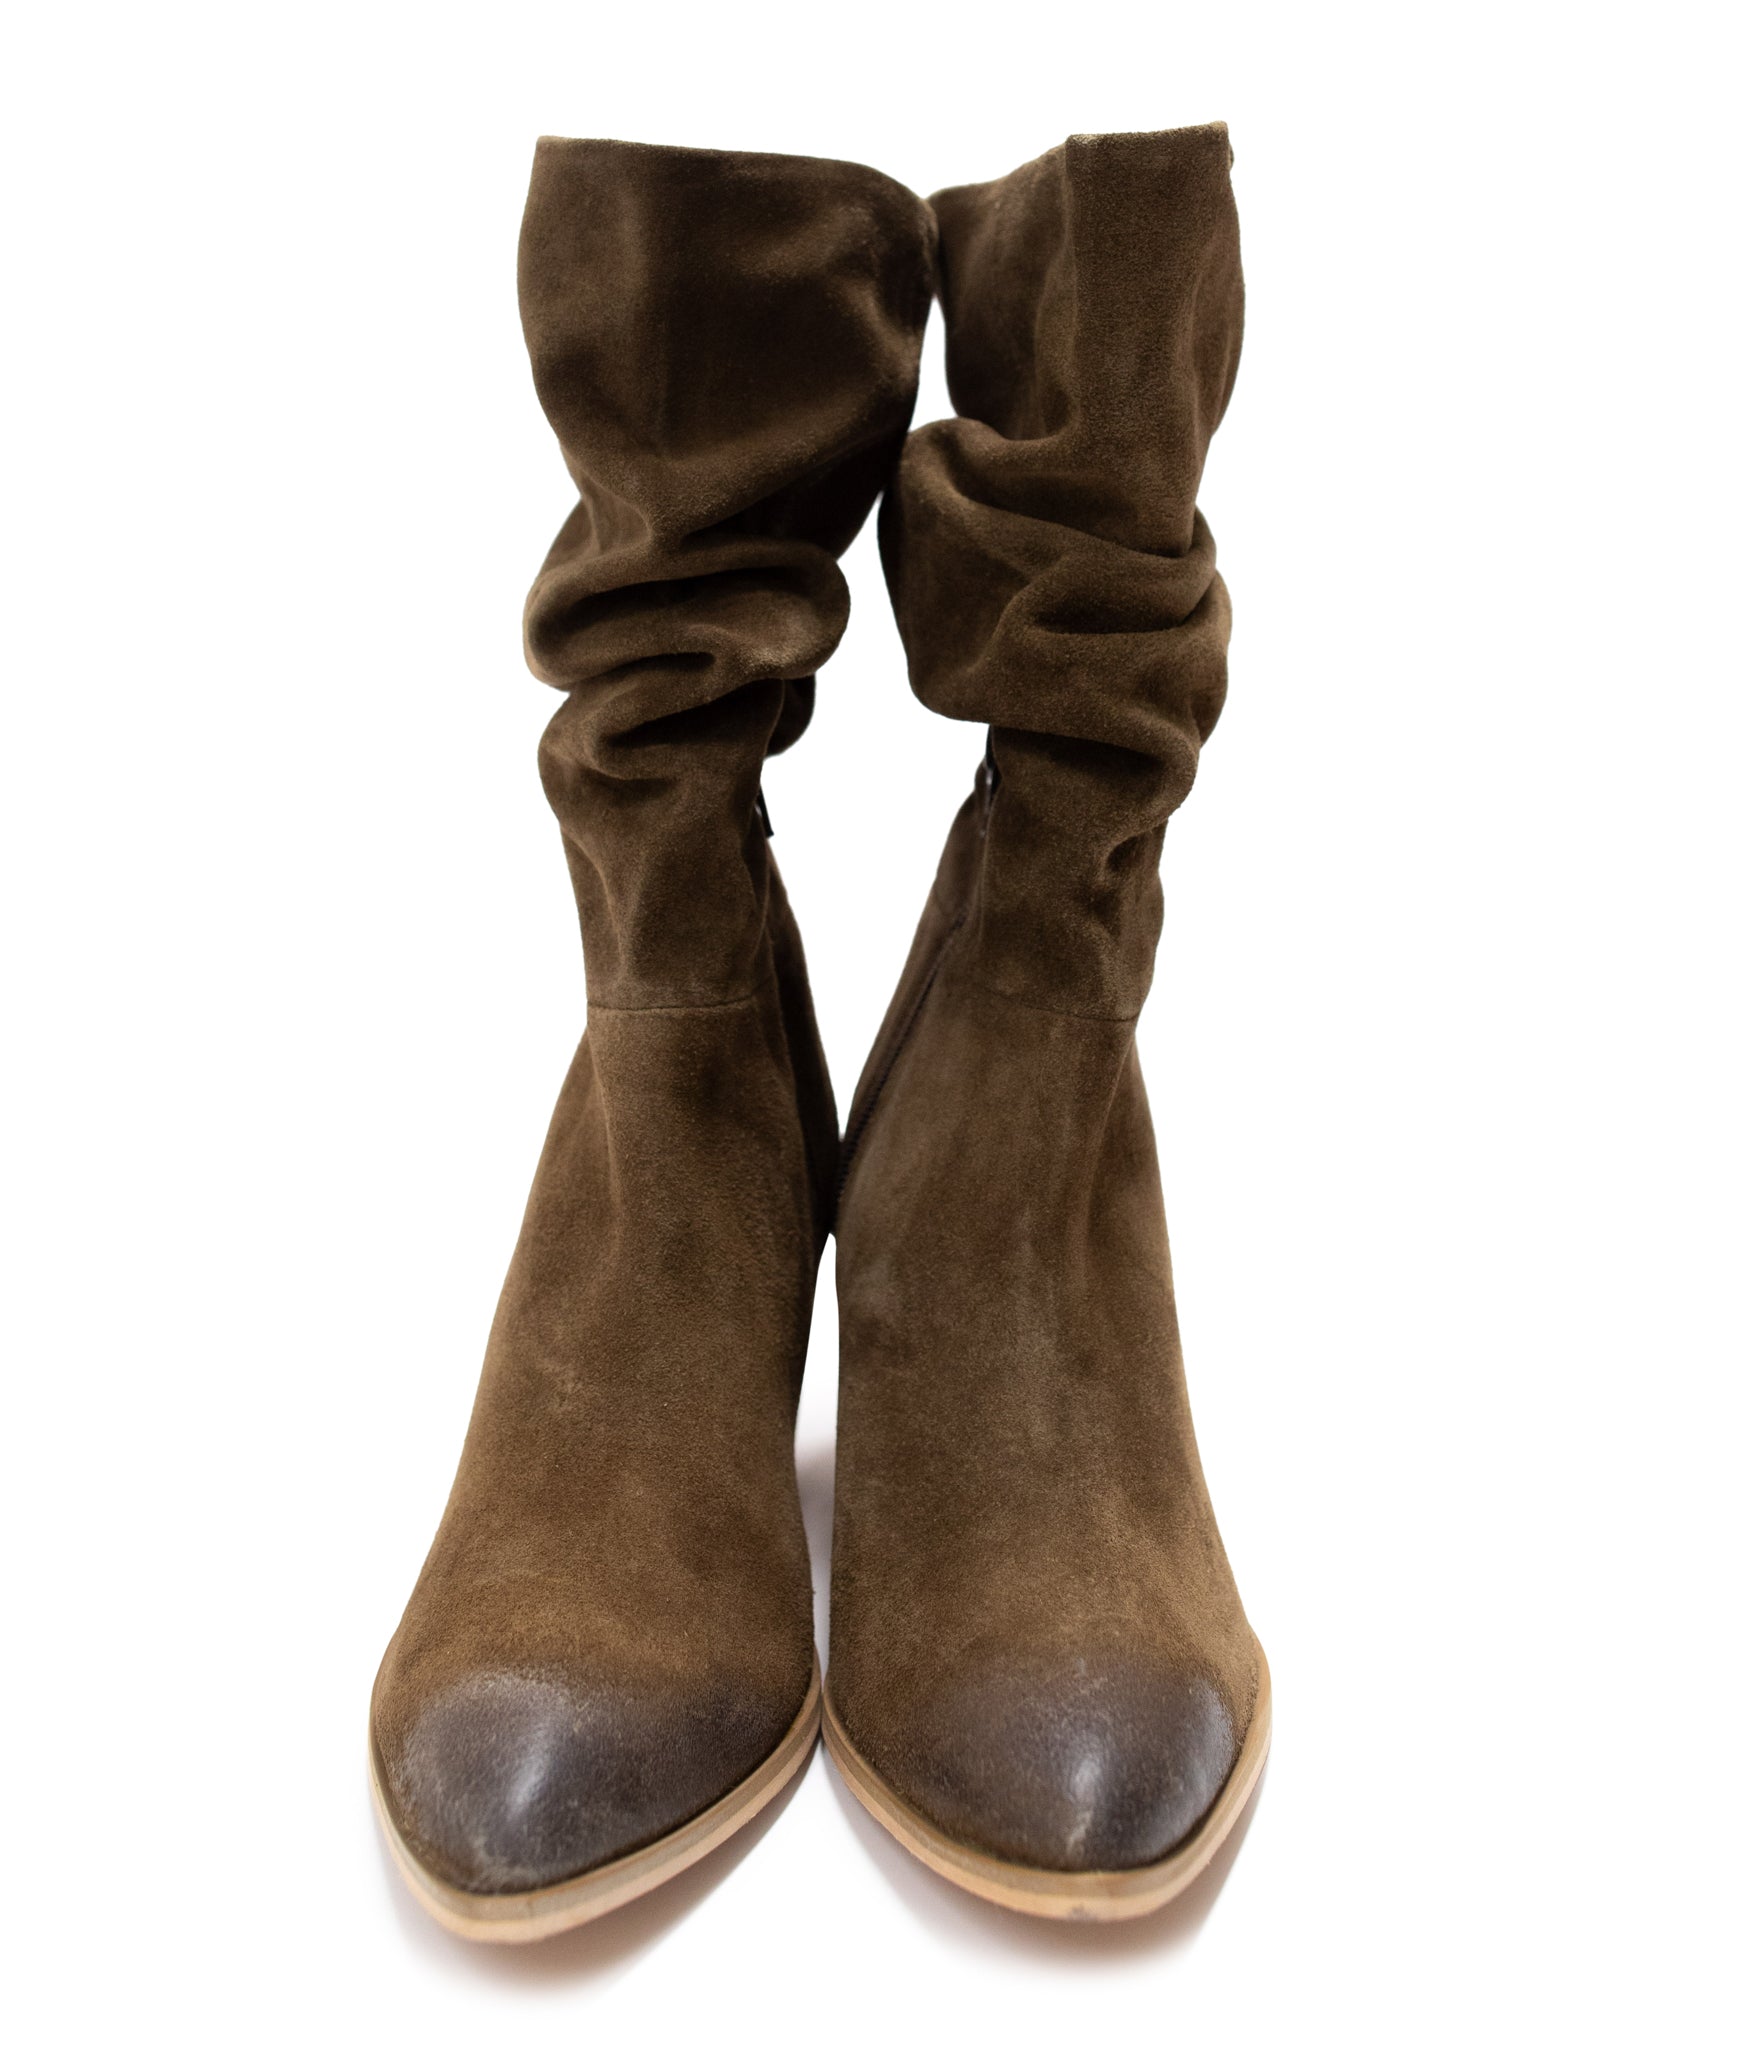 Darla Slouch Boot in Brown